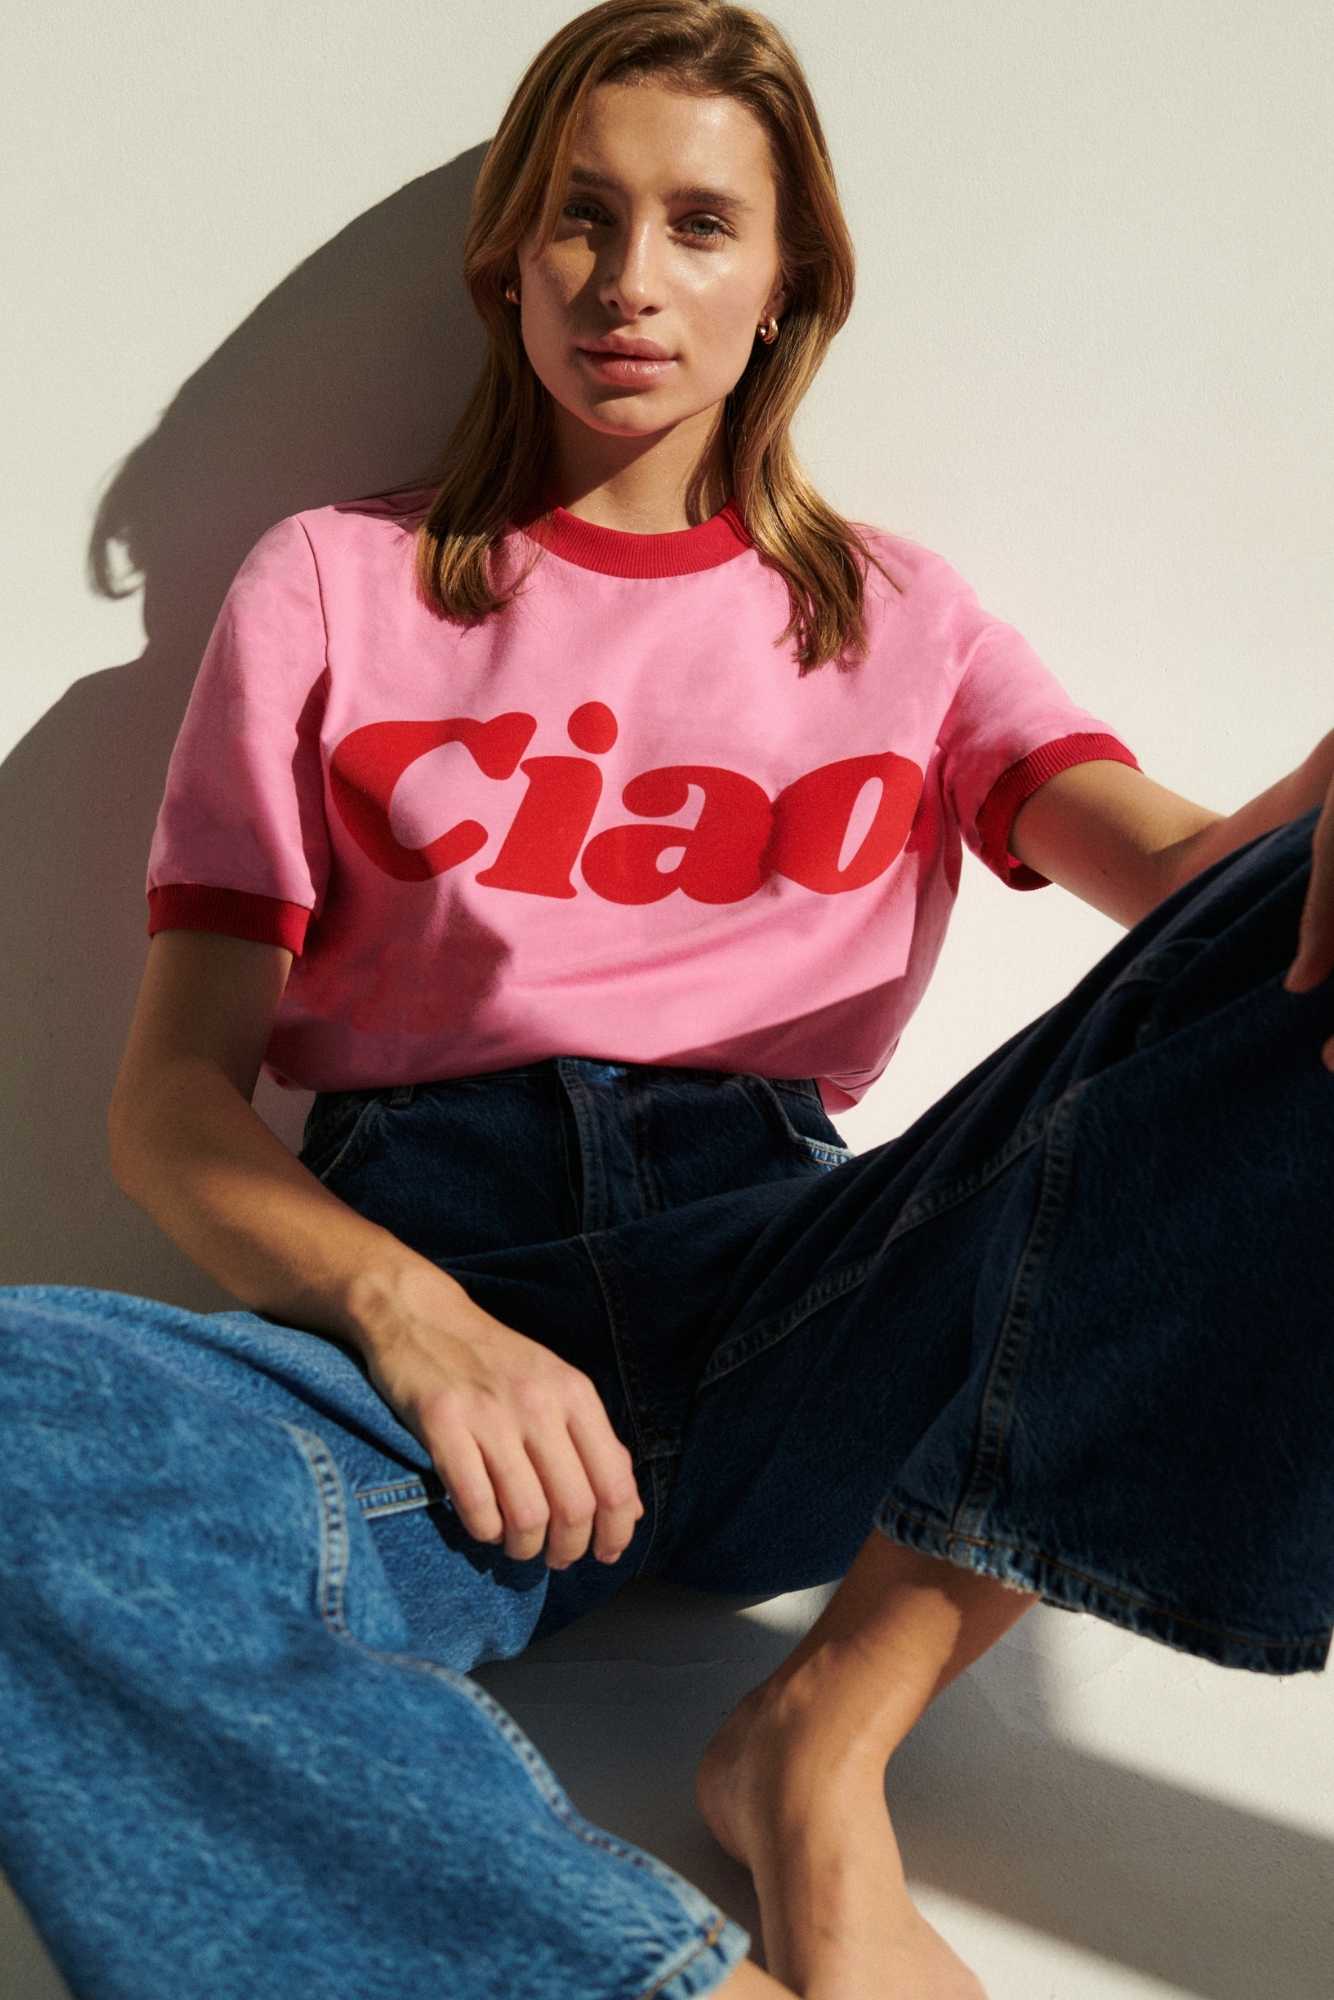 Les Goodies - She Is Sunday Ciao Sunday Tee Pink